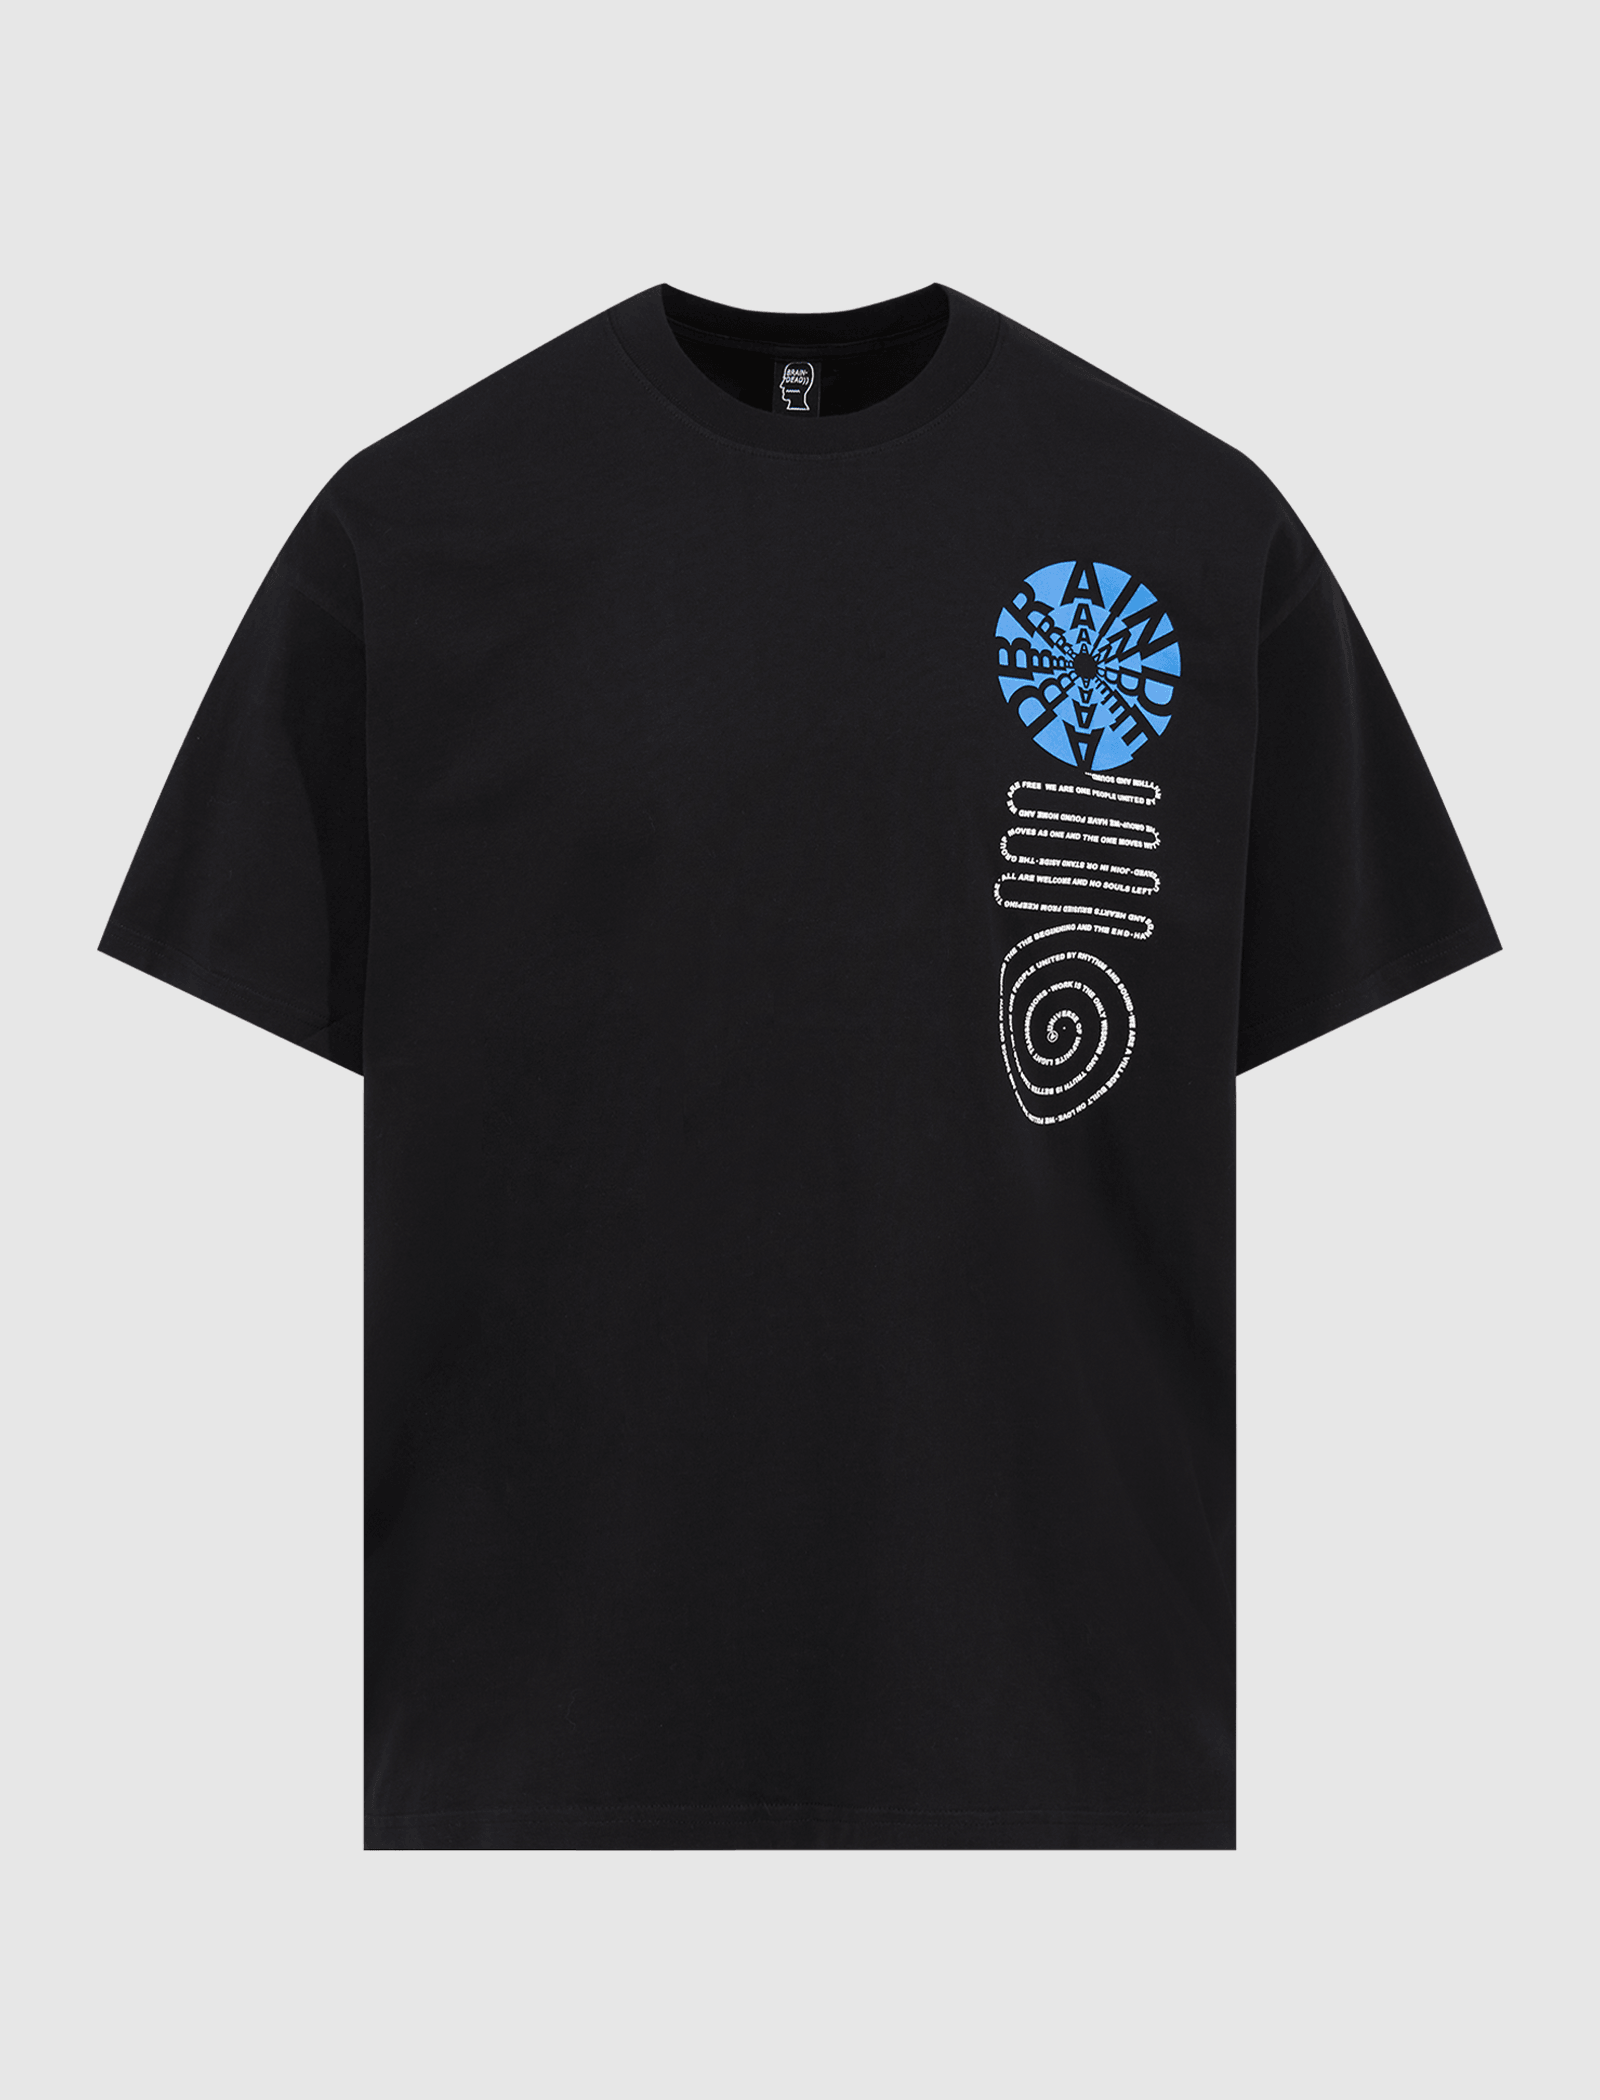 PERFECT VISIONS Tee